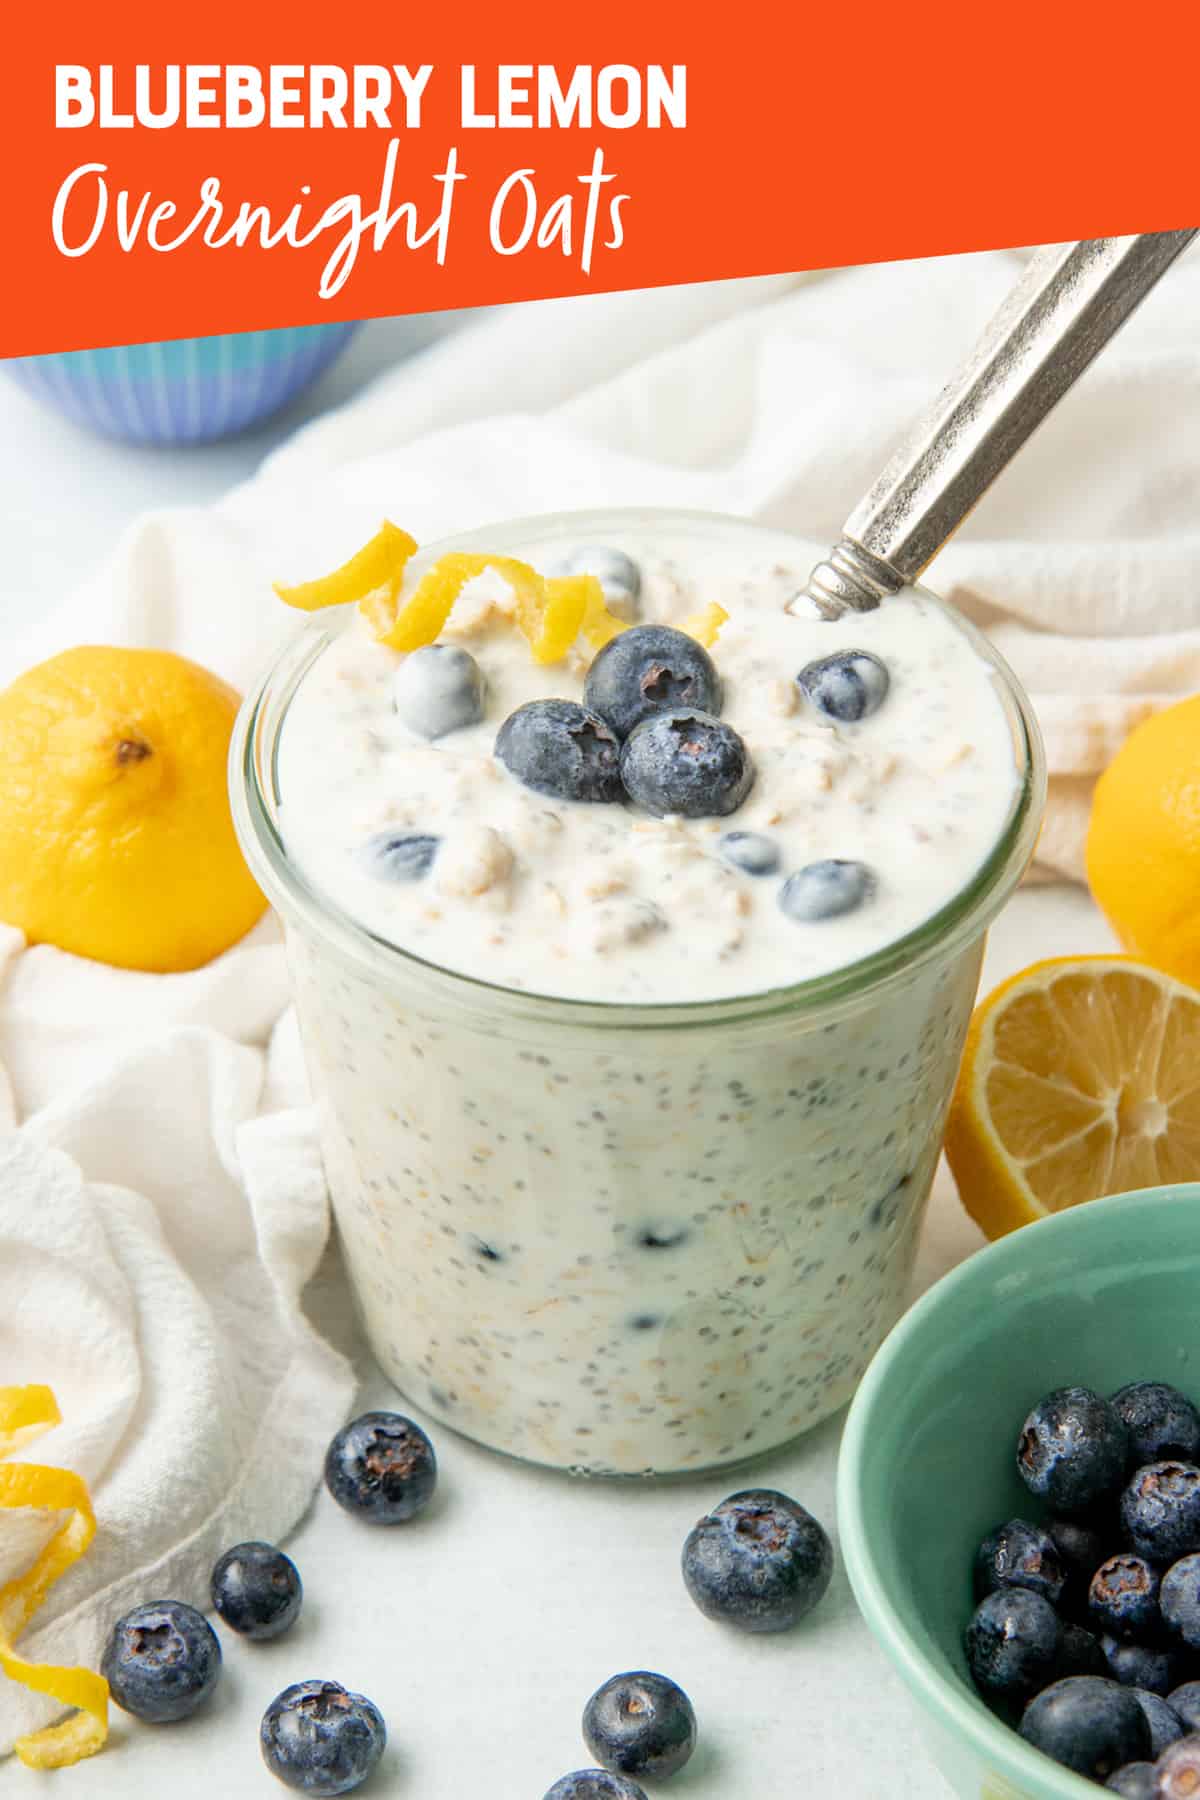 A spoon sits in a jar of blueberry overnight oats. Lemons surround the jar.